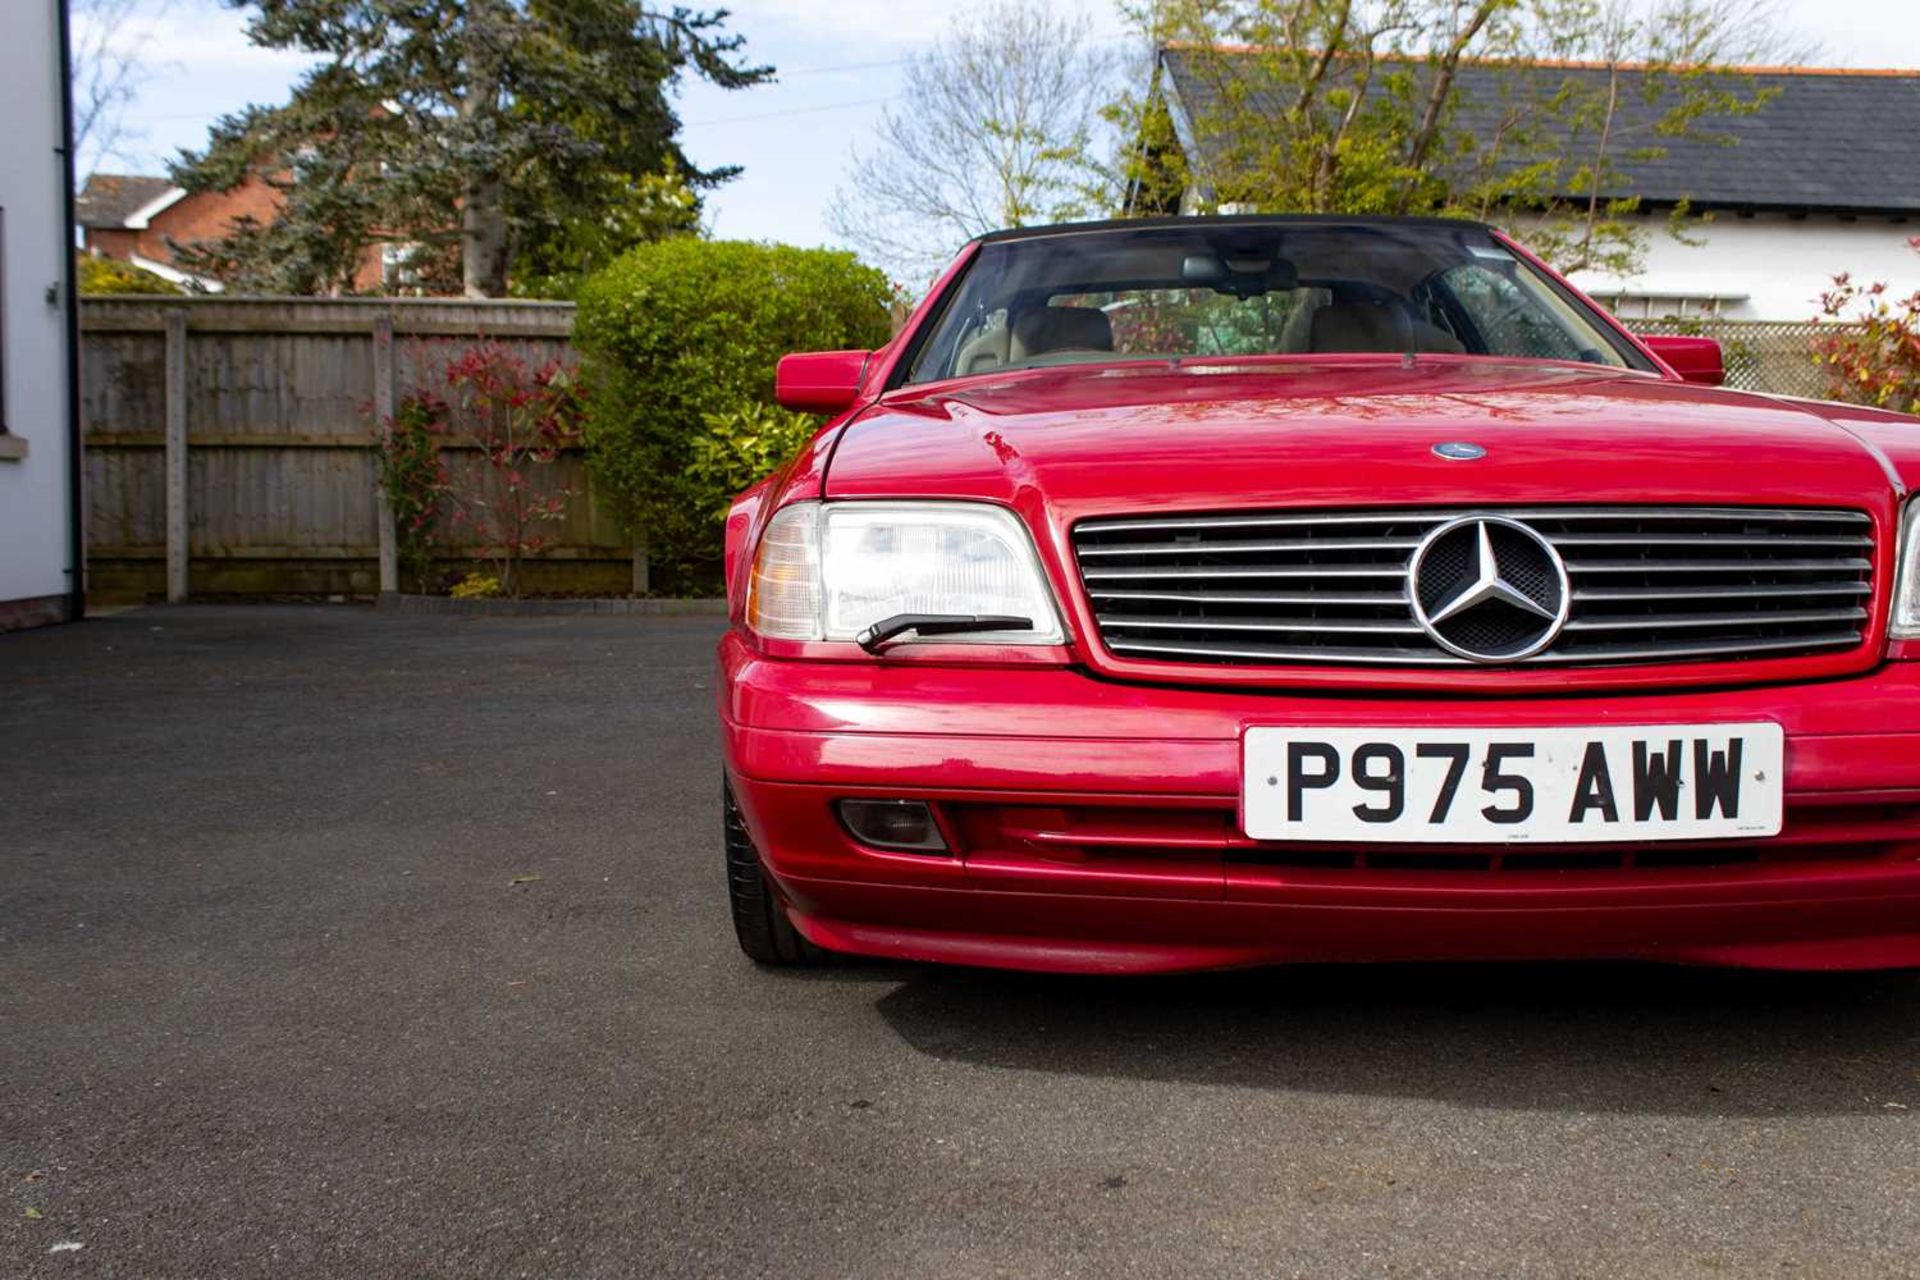 1997 Mercedes 320SL ***NO RESERVE*** Complete with desirable panoramic hardtop  - Image 3 of 94